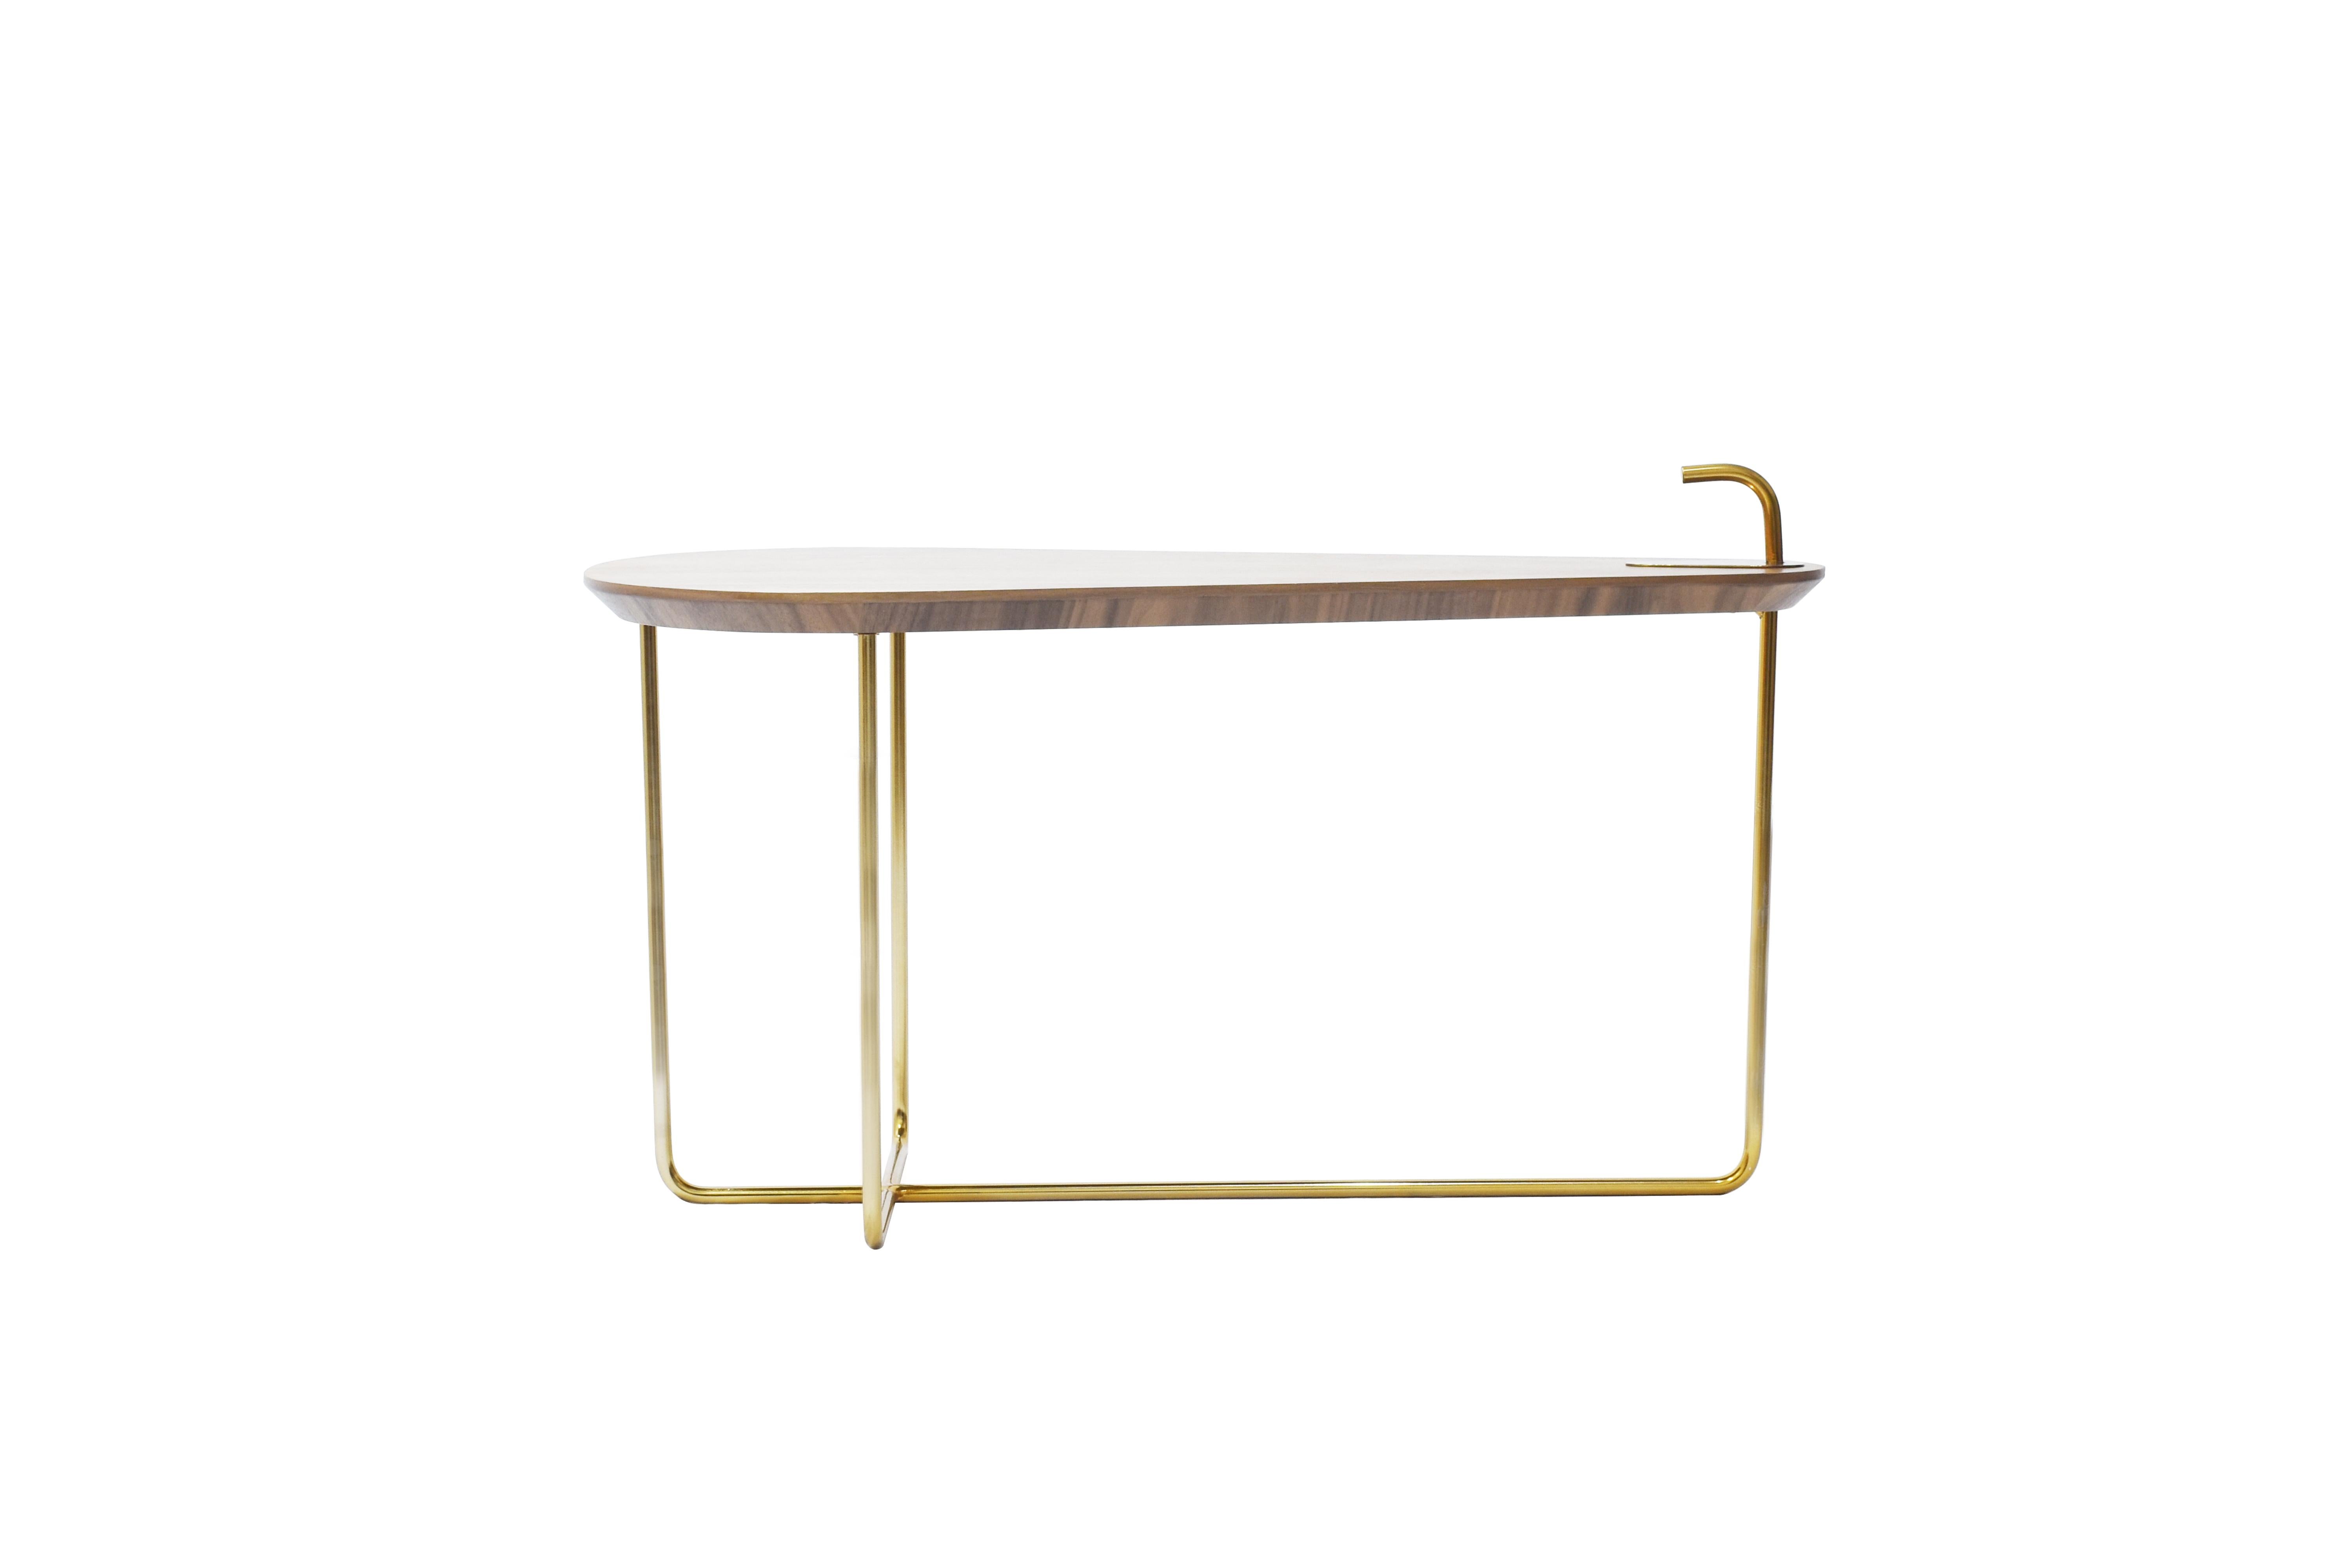 The Leaf coffee/ center table has a carbon steel structure with gold varnish painting or black/matte painting option. (The metallic finish can also be customized, ask for additional information)
The top is made in 25mm MDF with natural wood walnut